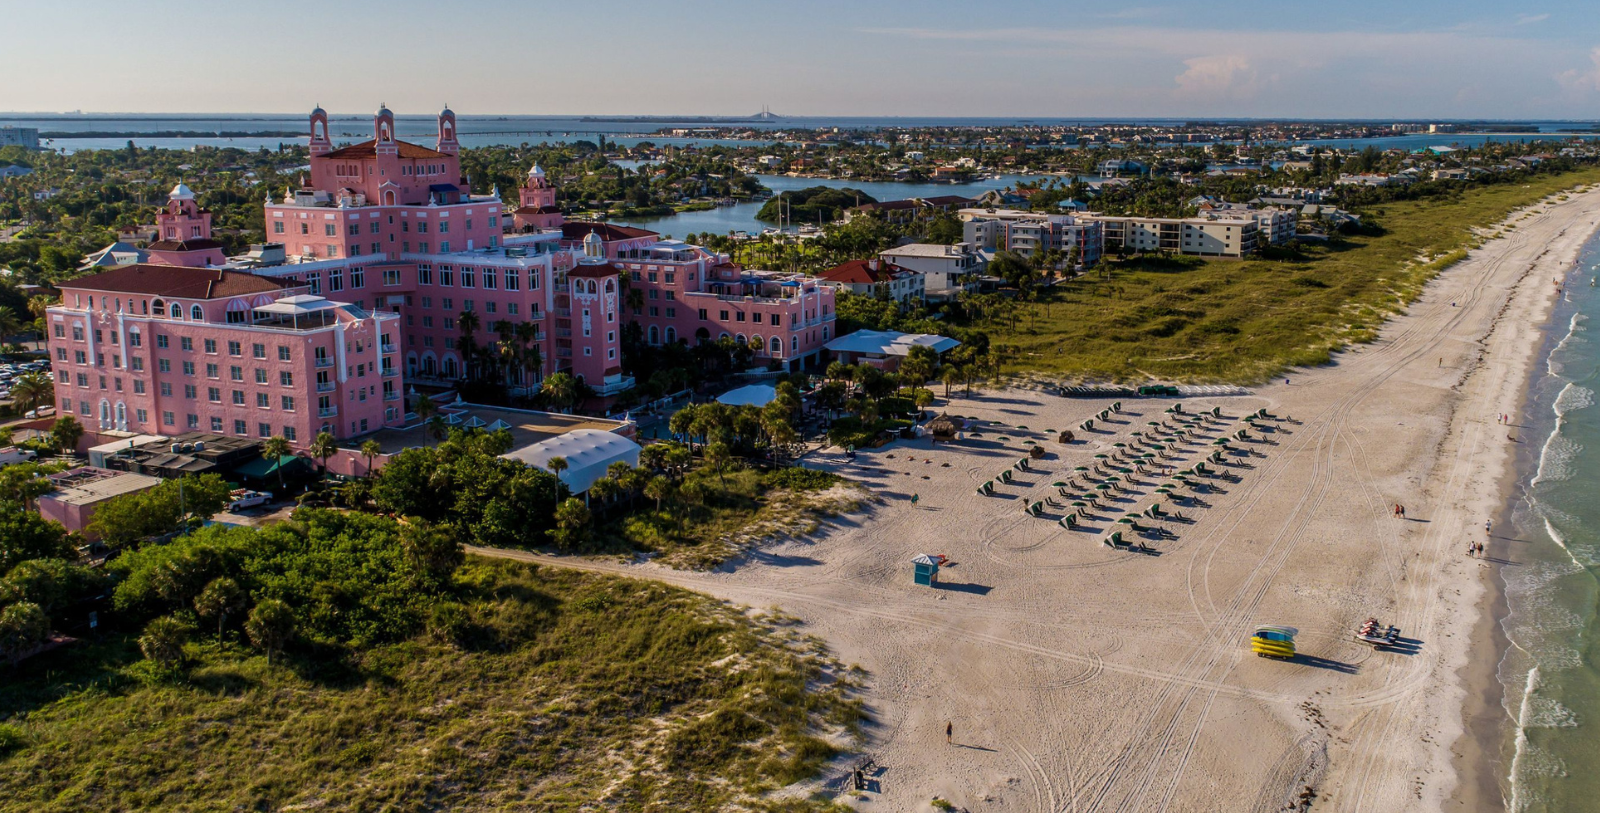 Image of The Don CeSar, 1928, a Member of Historic Hotels of America since 1989